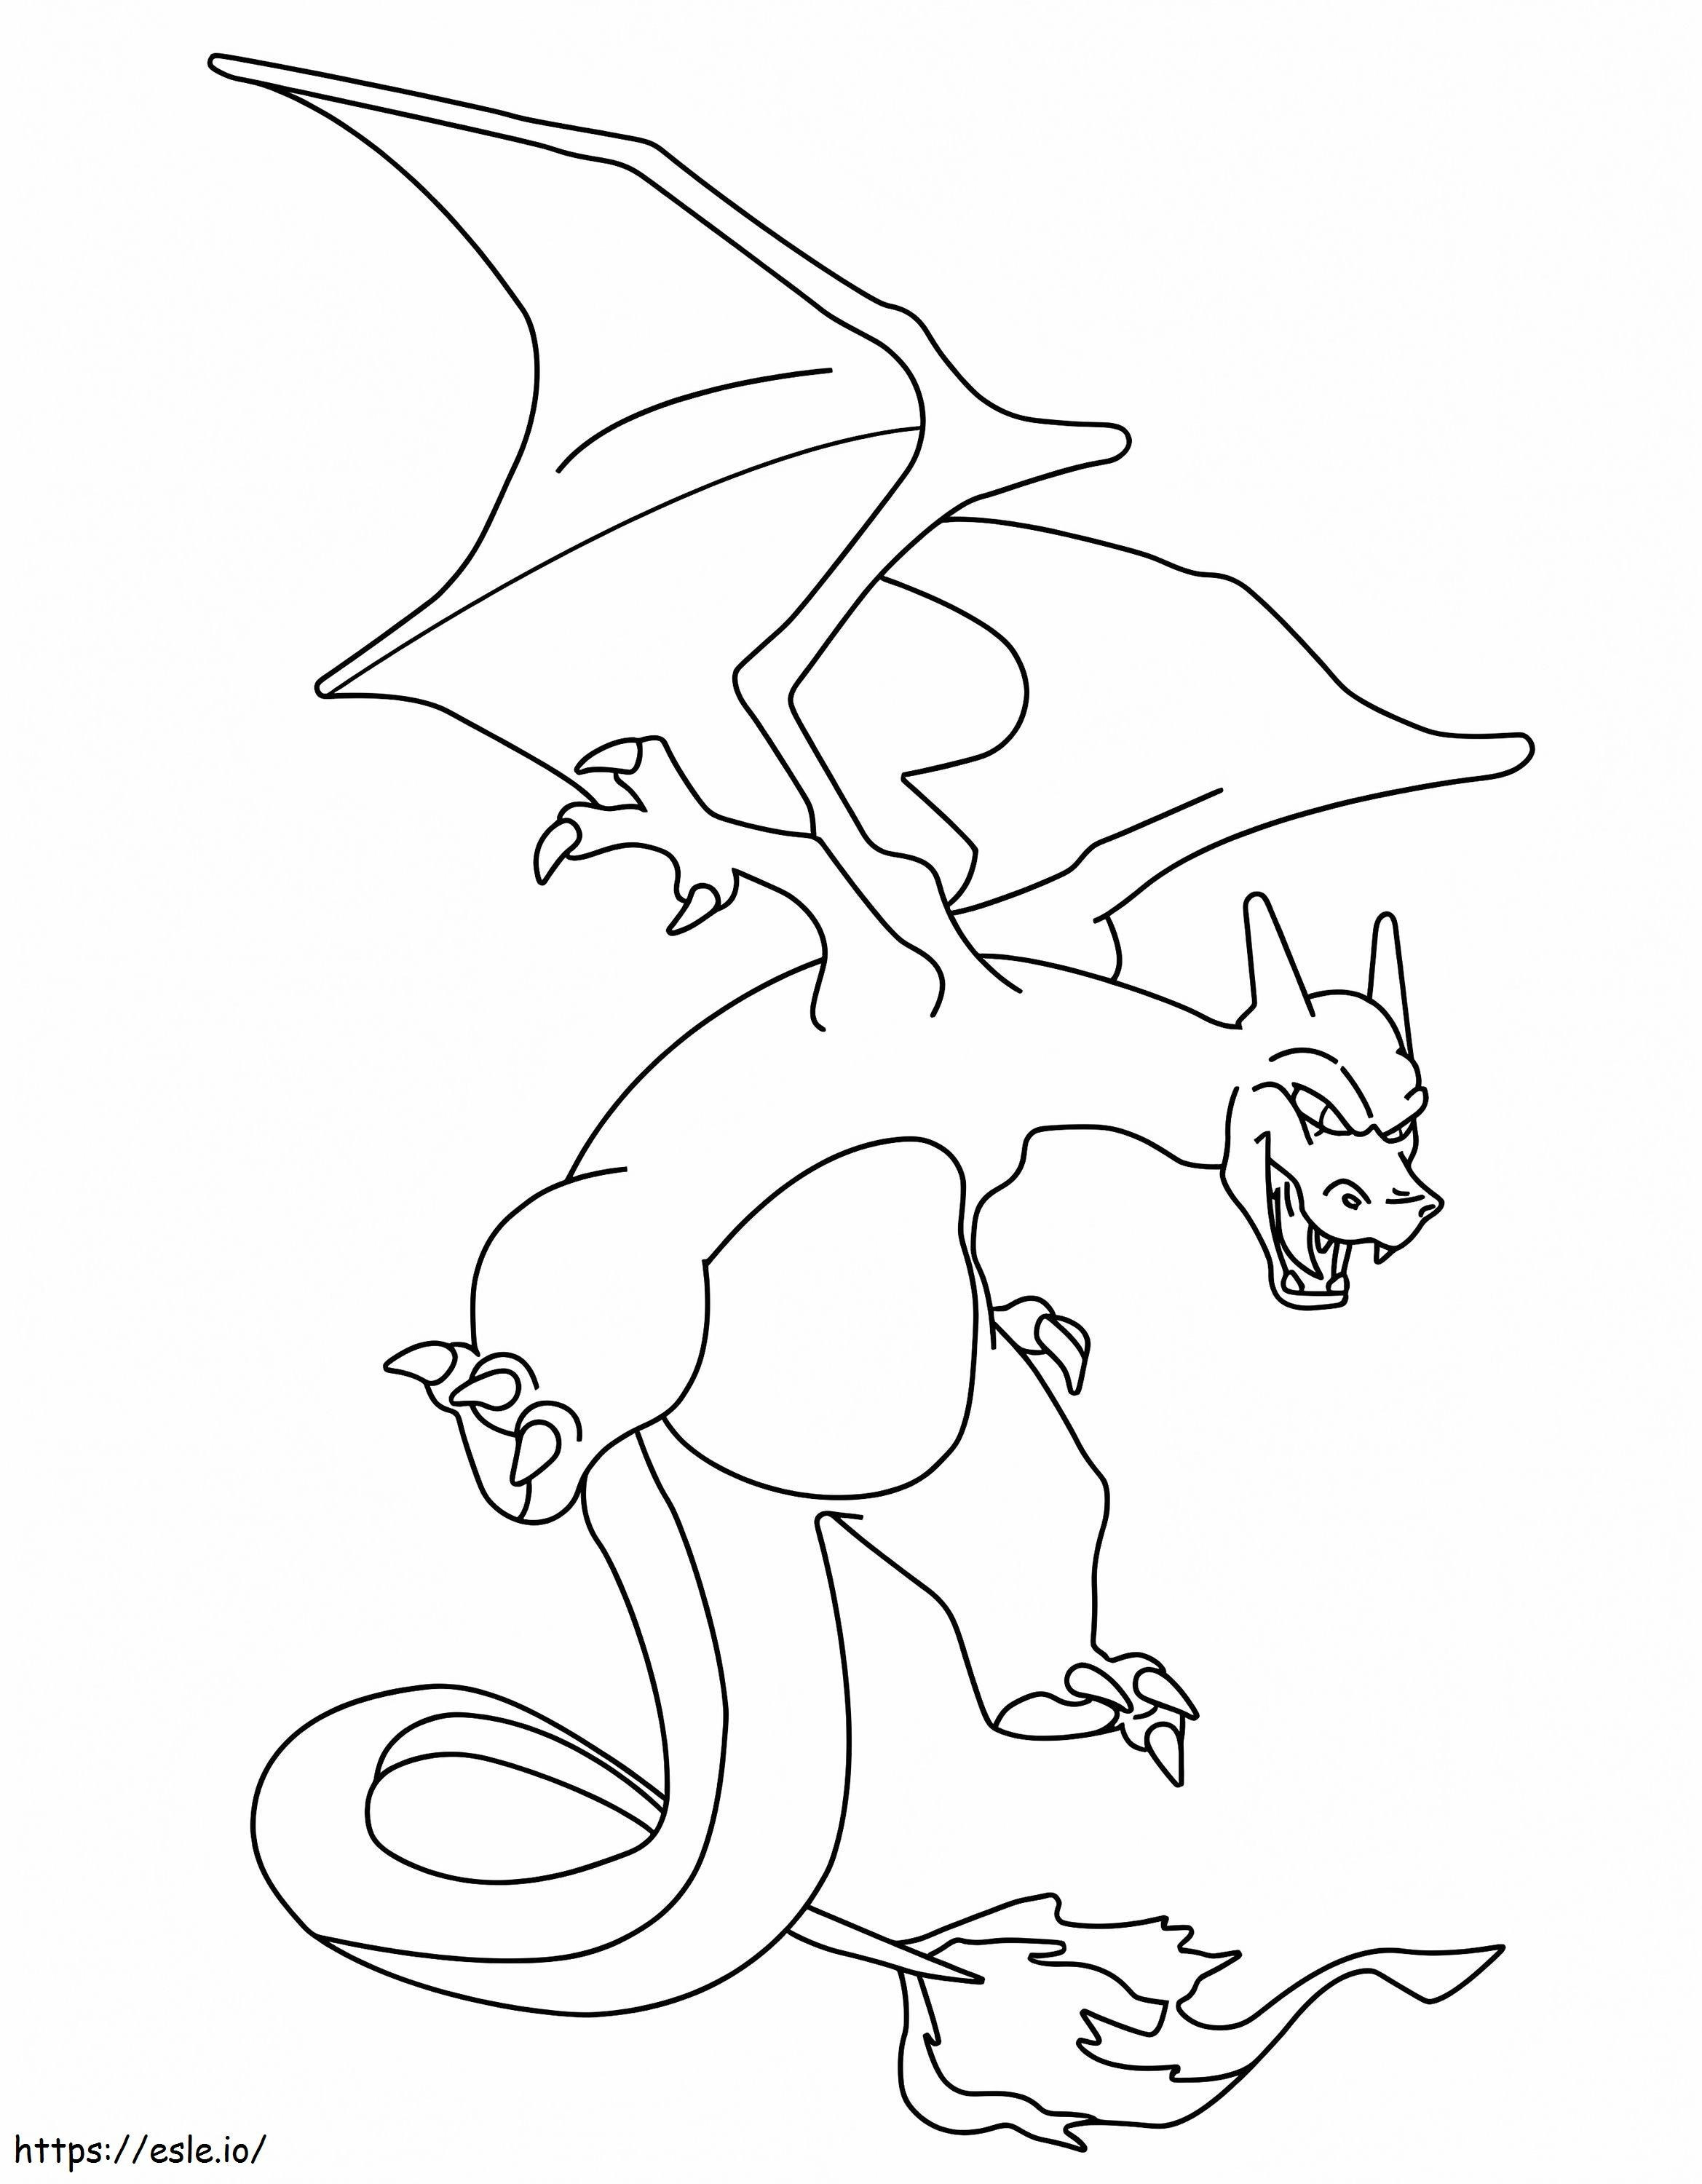 Charizard Is Strong coloring page